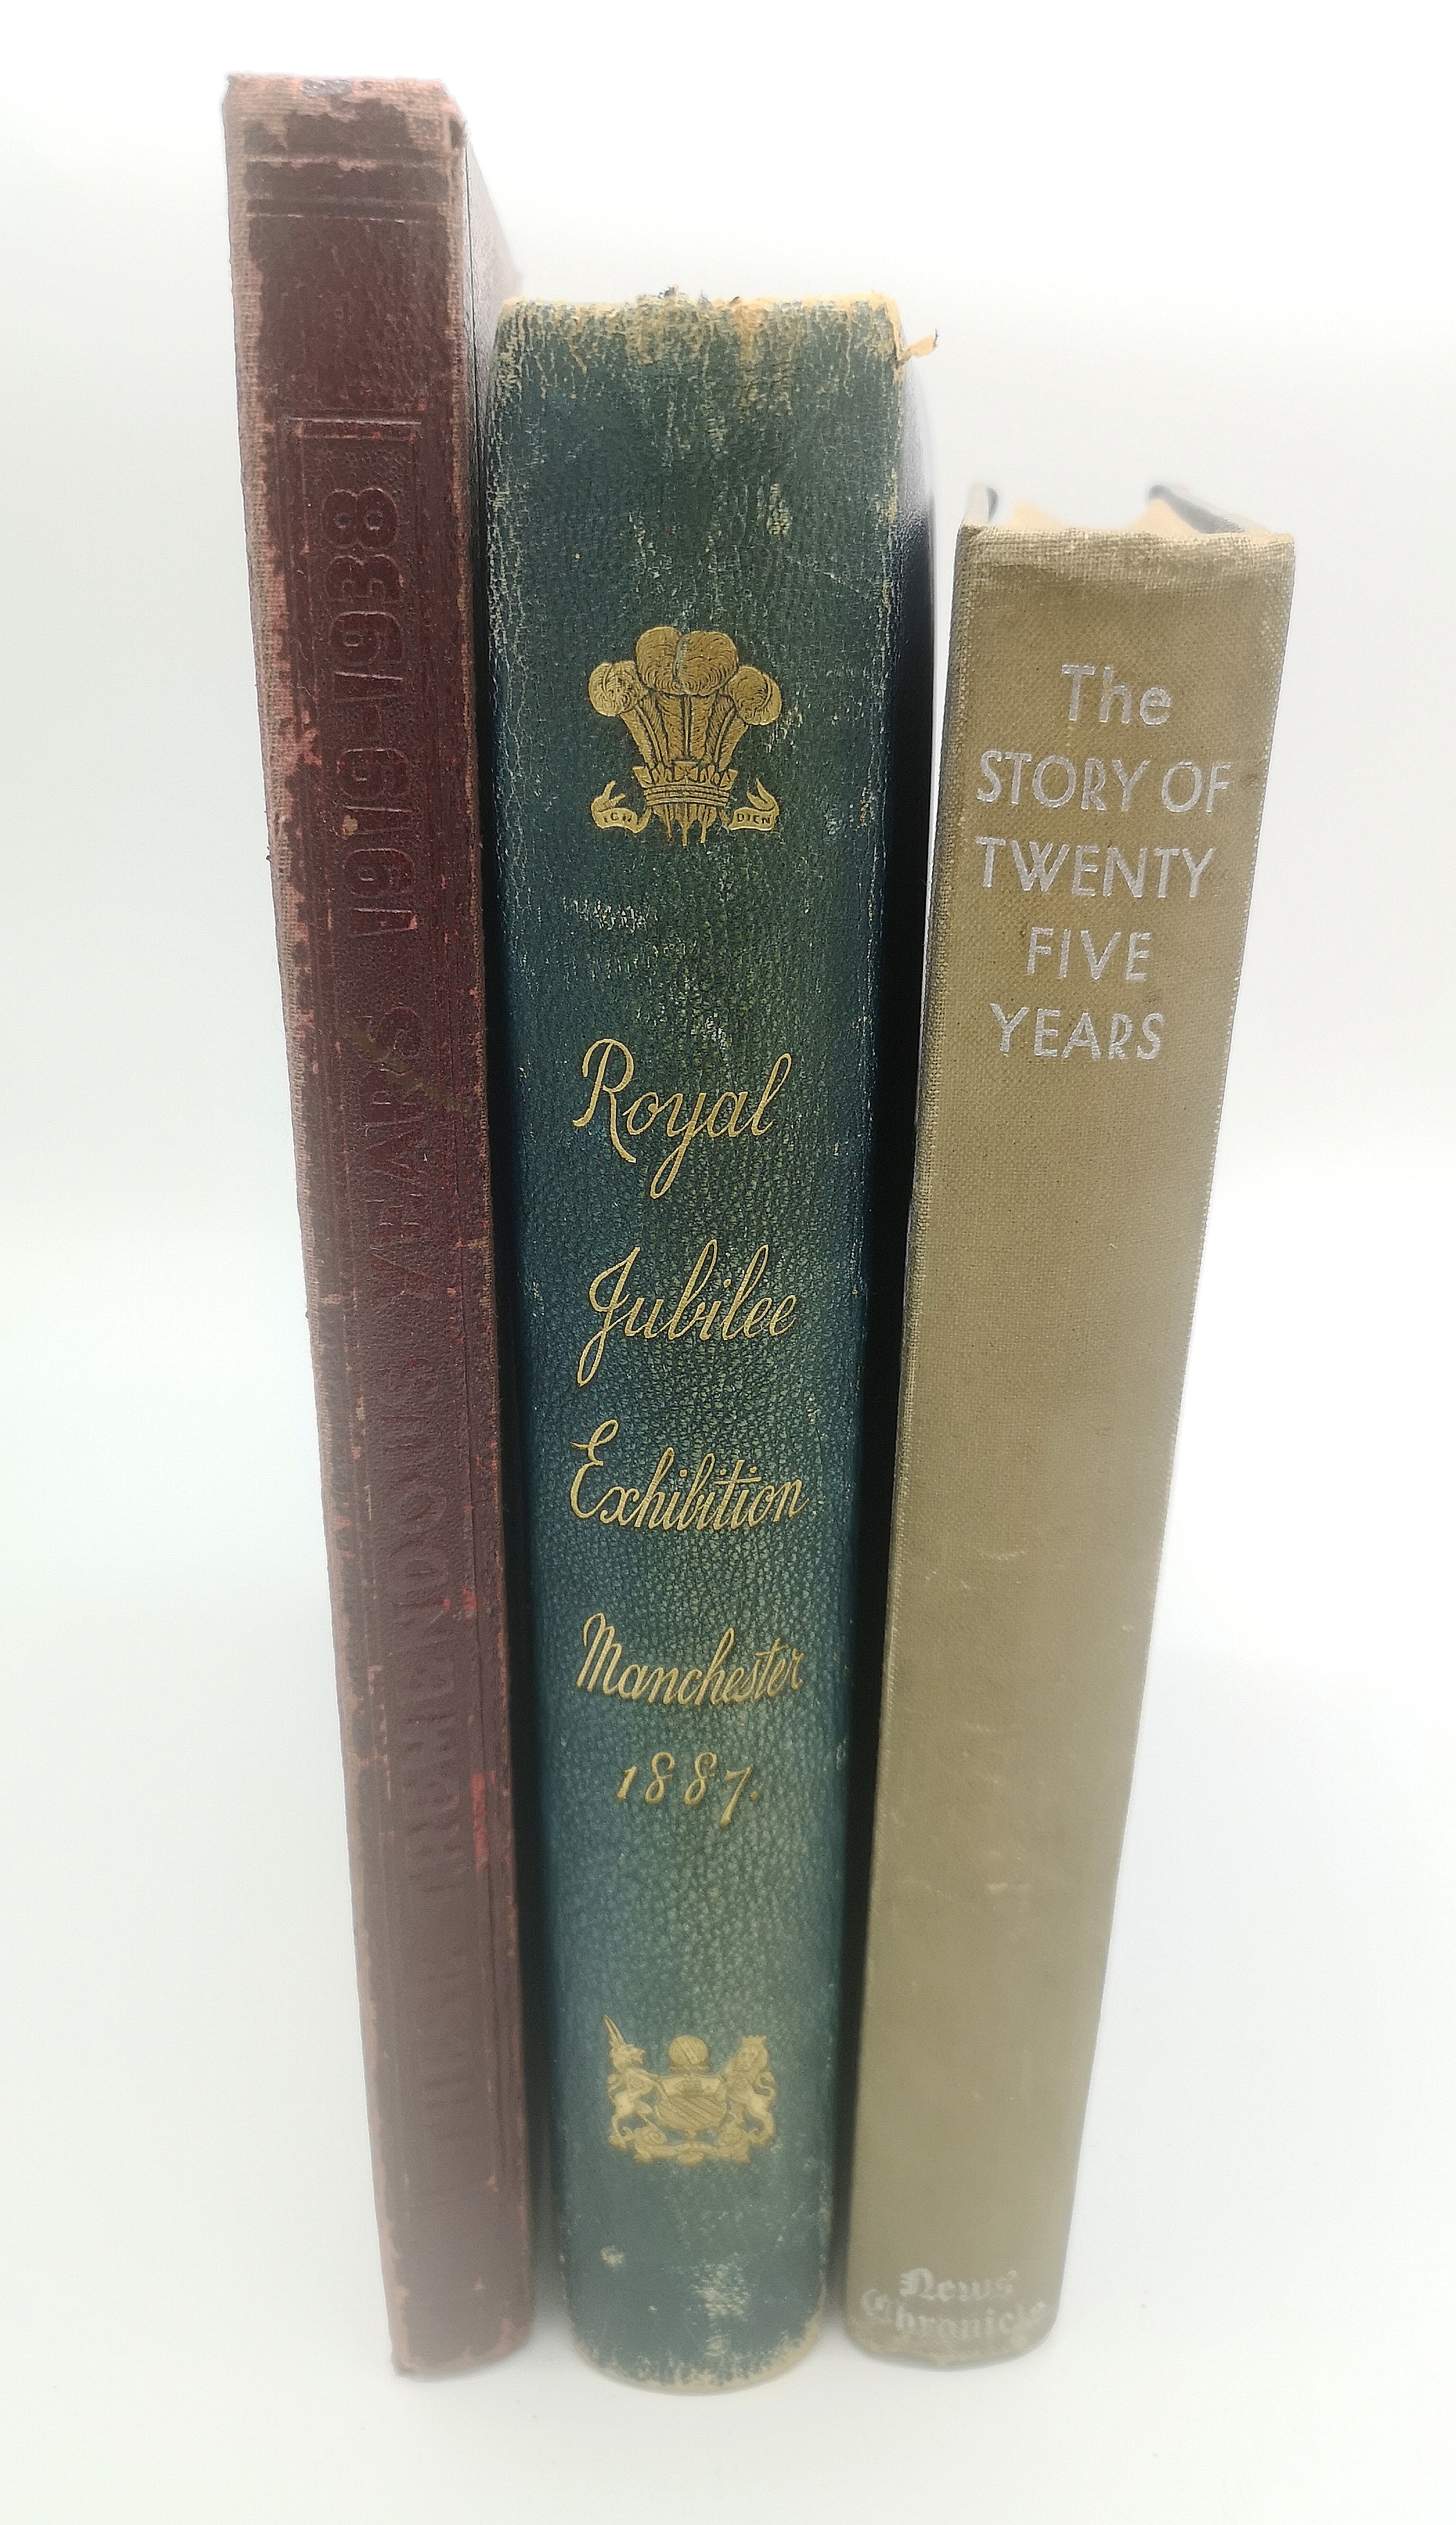 Royal Jubilee Exhibition Manchester 1887 Official Catalogue; with two other books